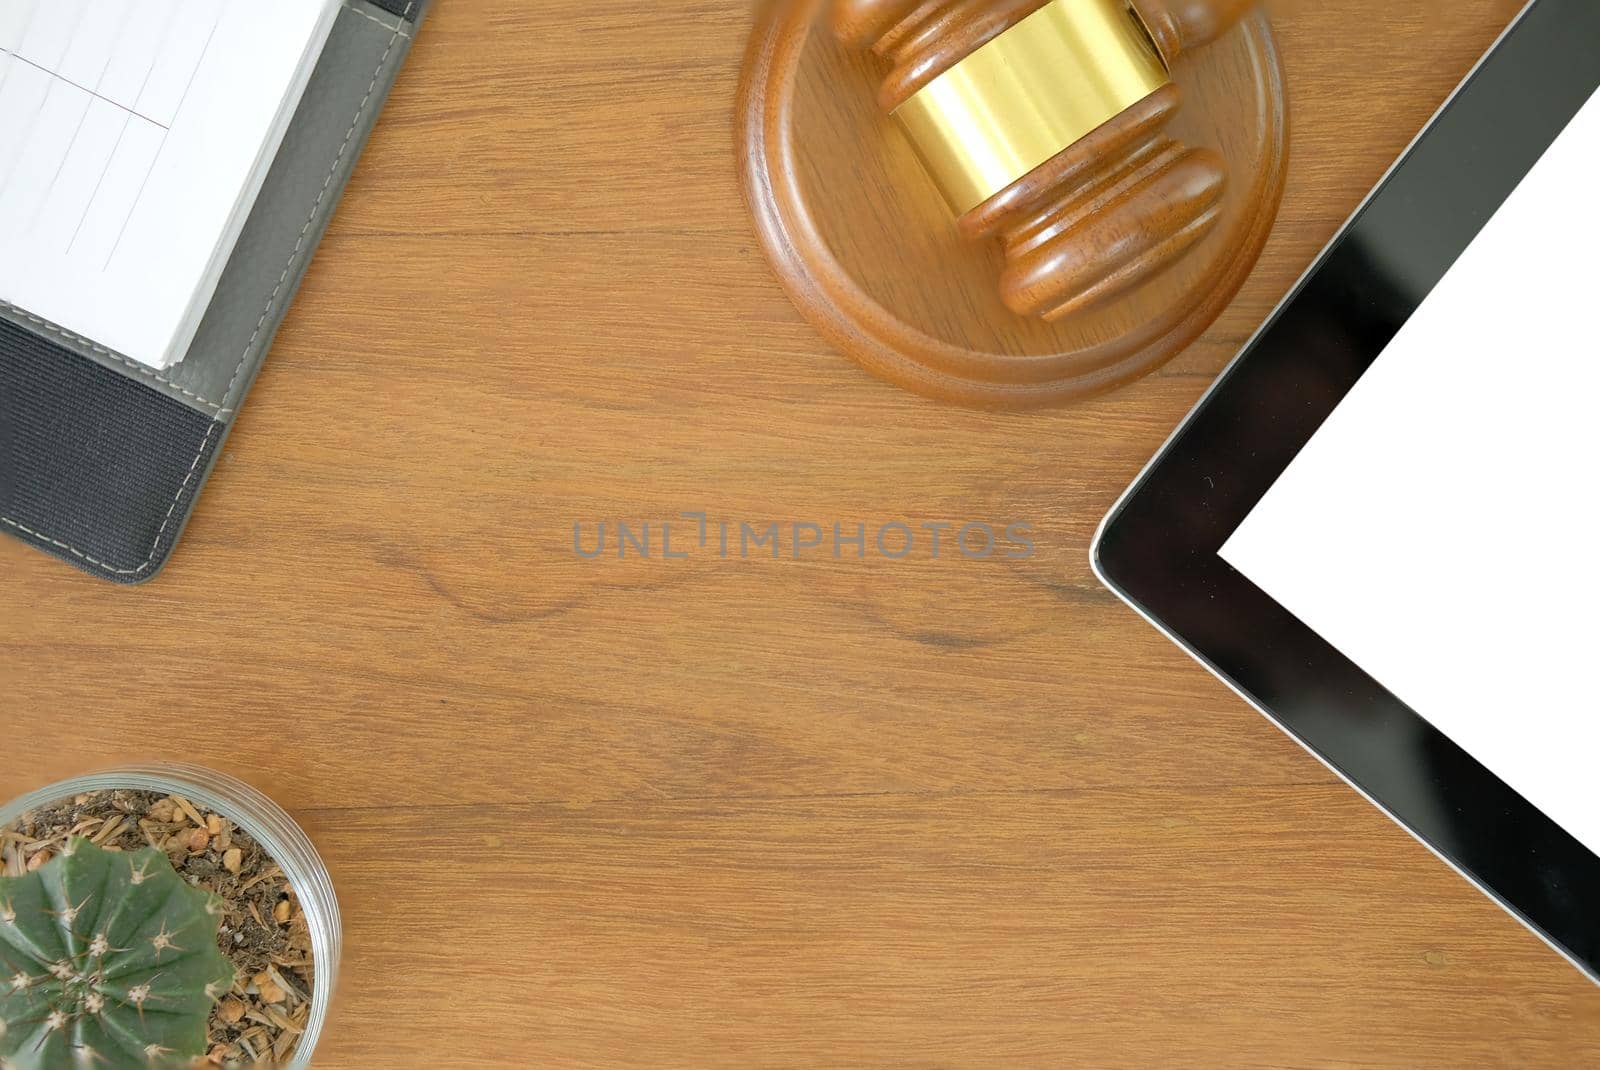 judge gavel & tablet notebook at courtroom. lawyer attorney justice workplace by pp99